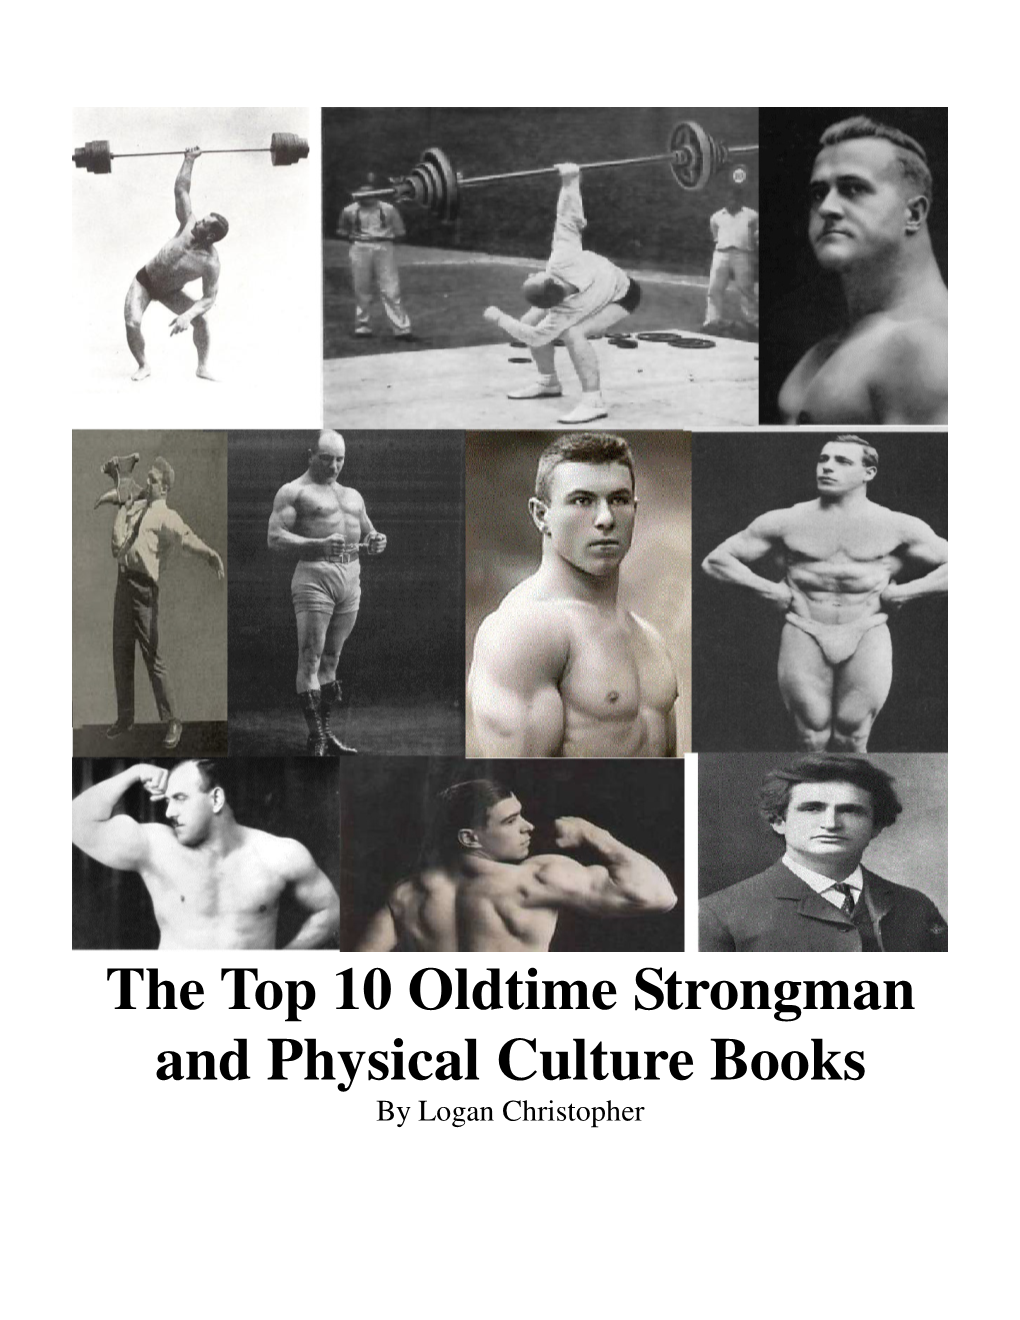 The Top 10 Oldtime Strongman and Physical Culture Books by Logan Christopher